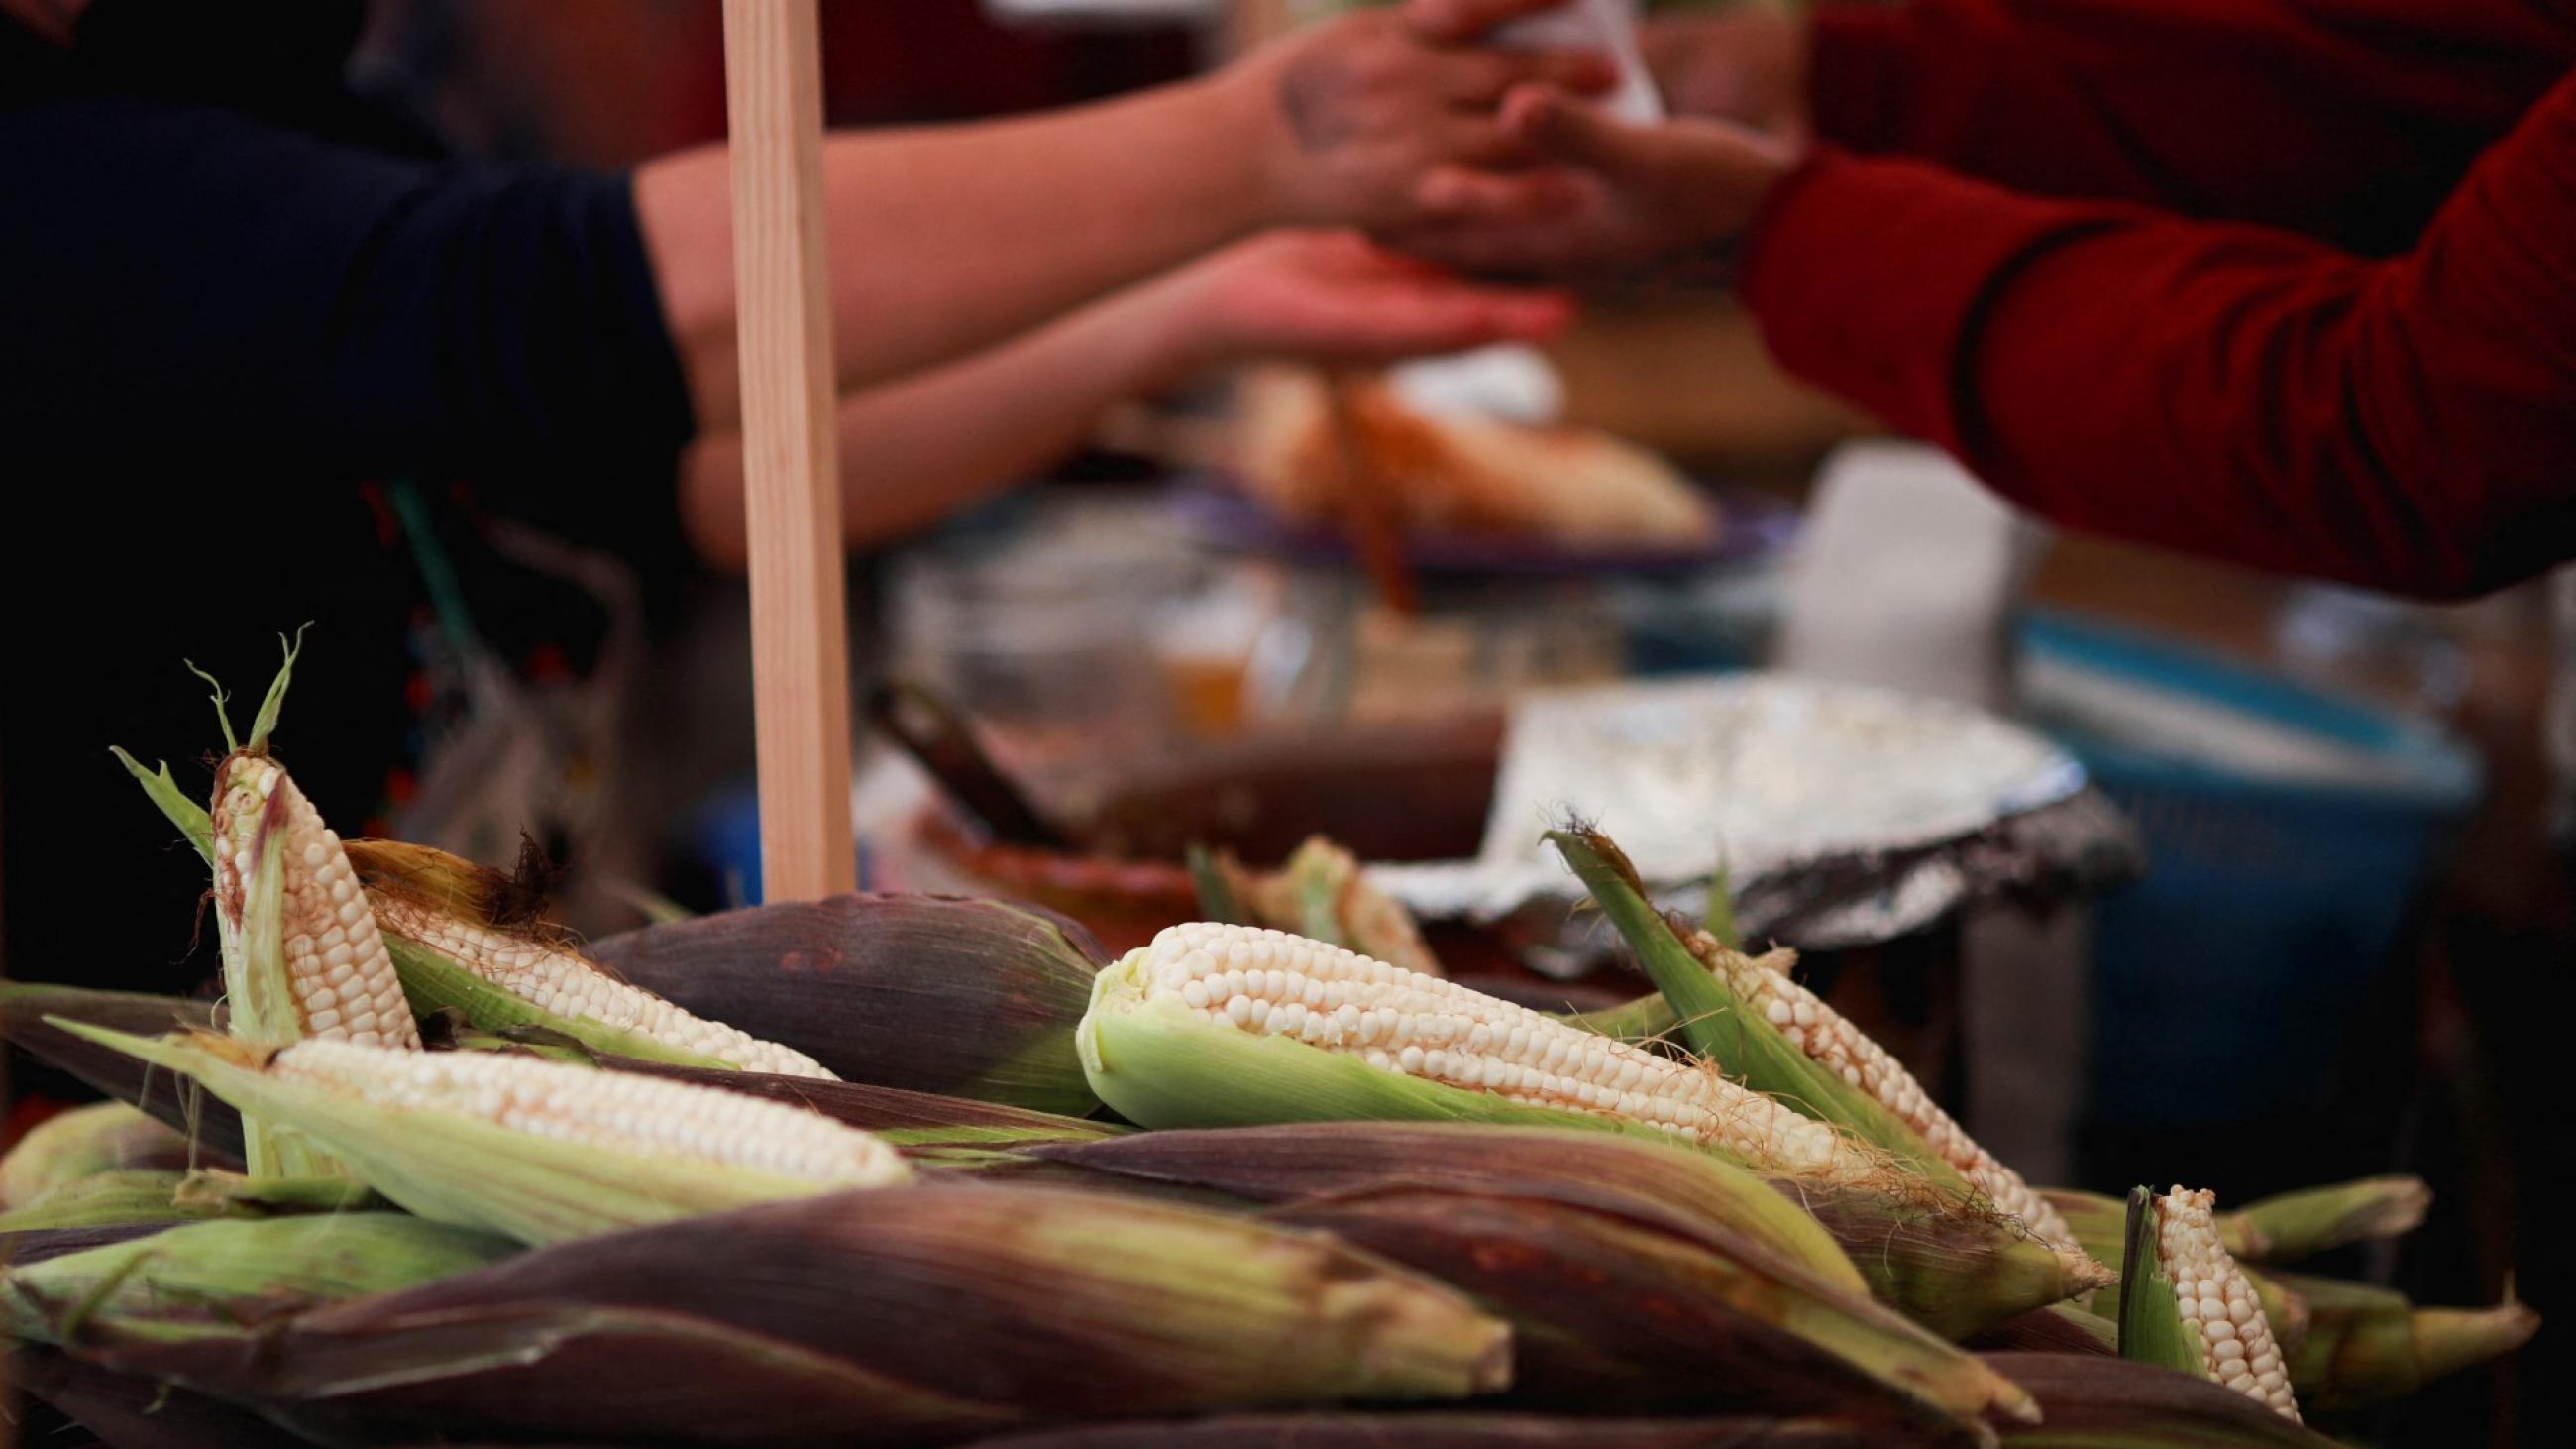 Corn cobs are pictured during the Corn and Milpa Fair in the Zócalo square as people celebrate Día Nacional del Maíz (National Corn Day), in Mexico City, Mexico, on September 29, 2022. 